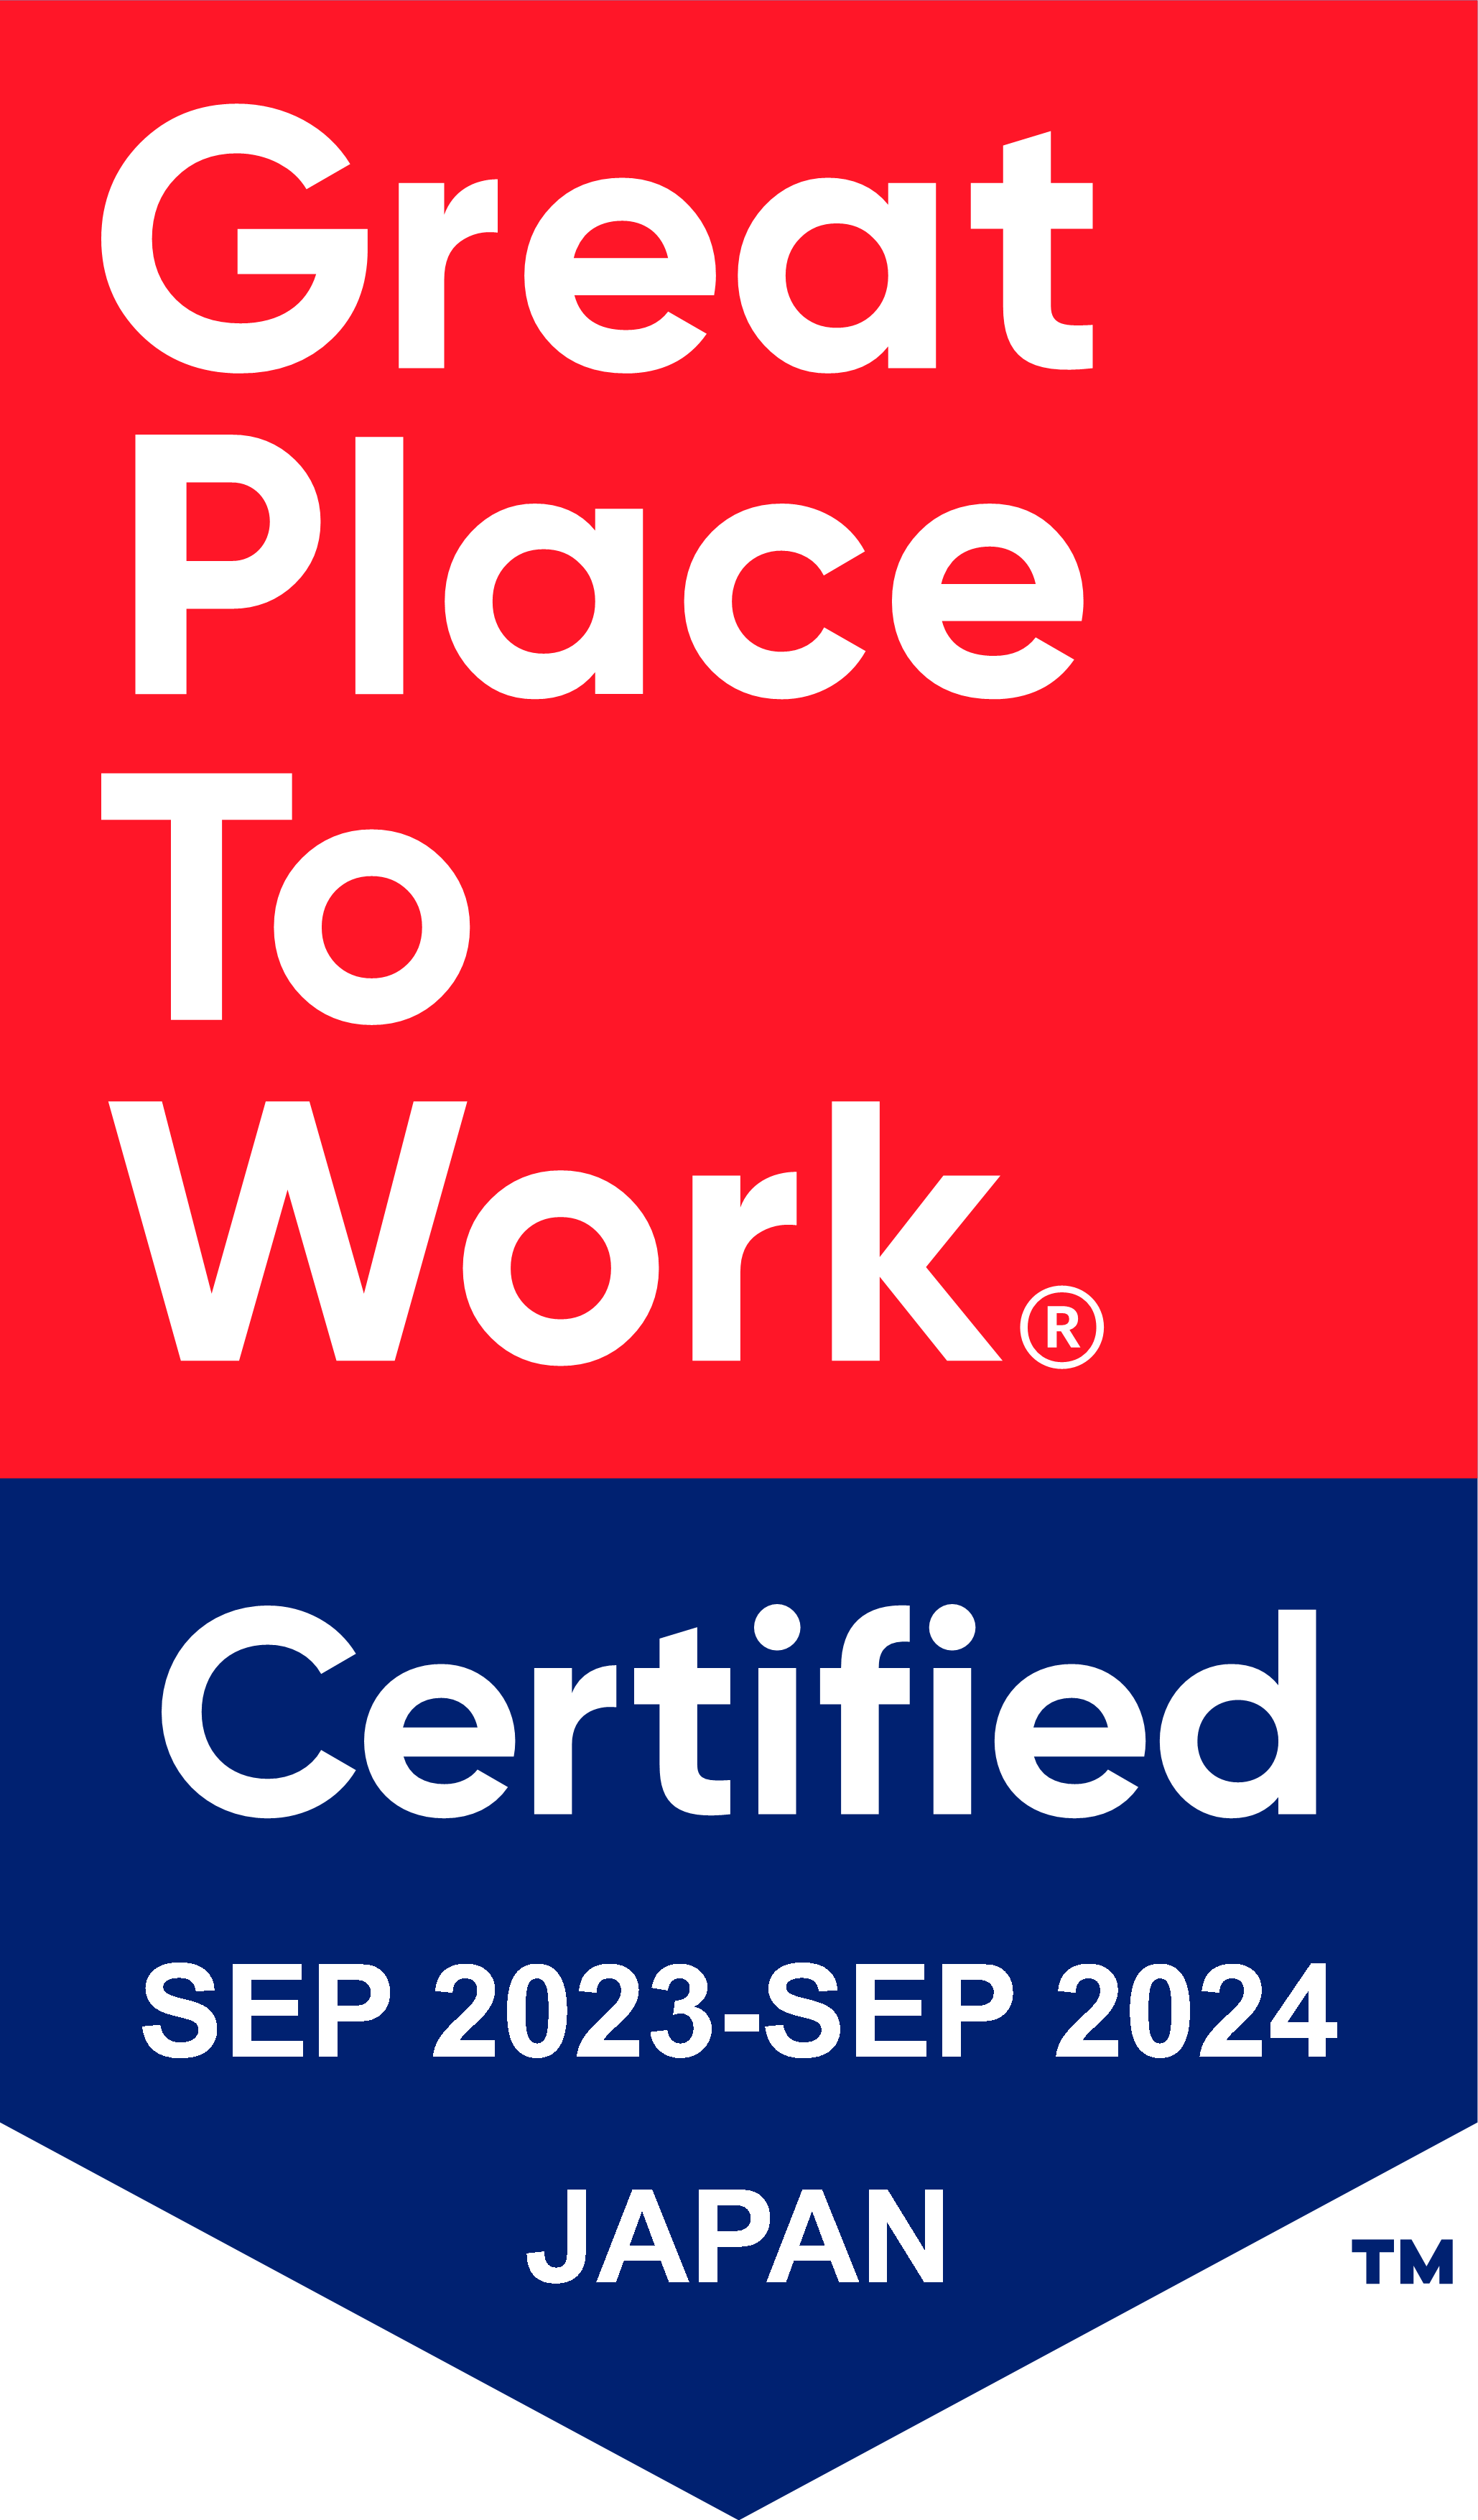 Great Place to Work Award - Certified - Sep 2023 - Sep 2024 - Japan